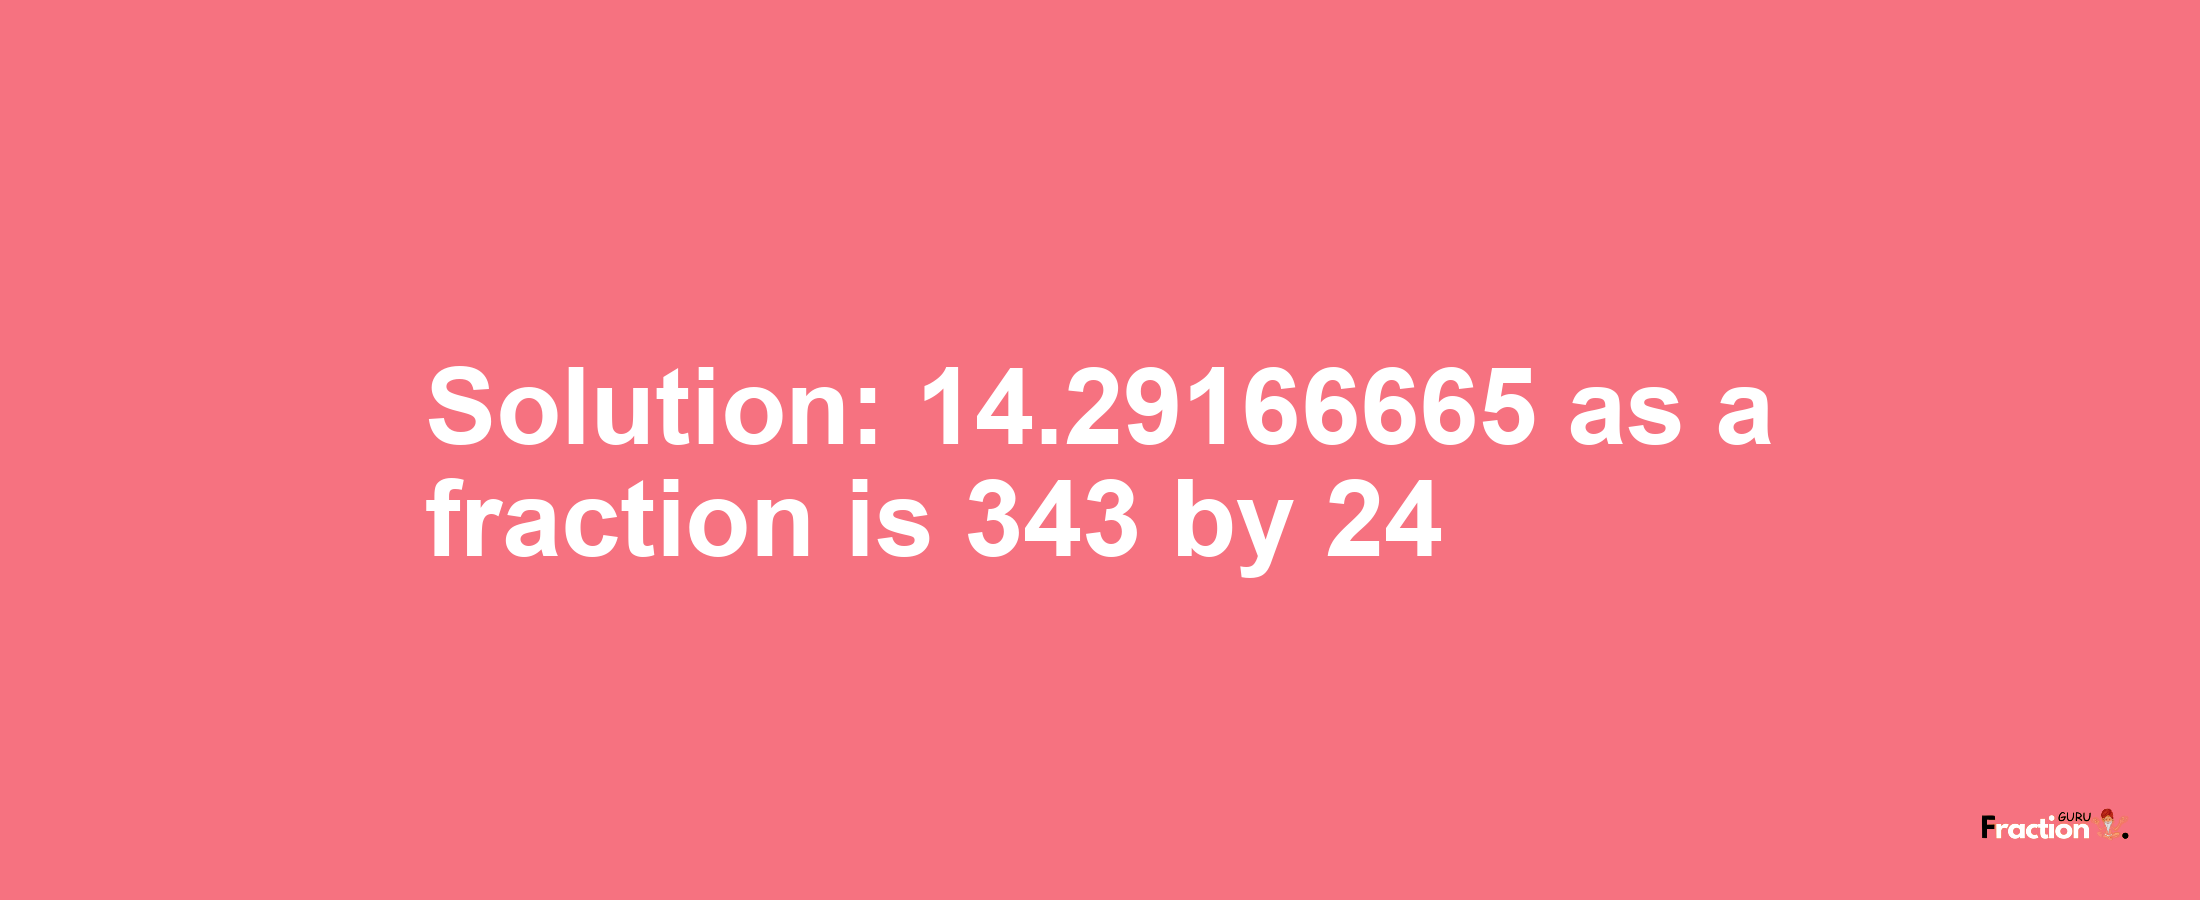 Solution:14.29166665 as a fraction is 343/24